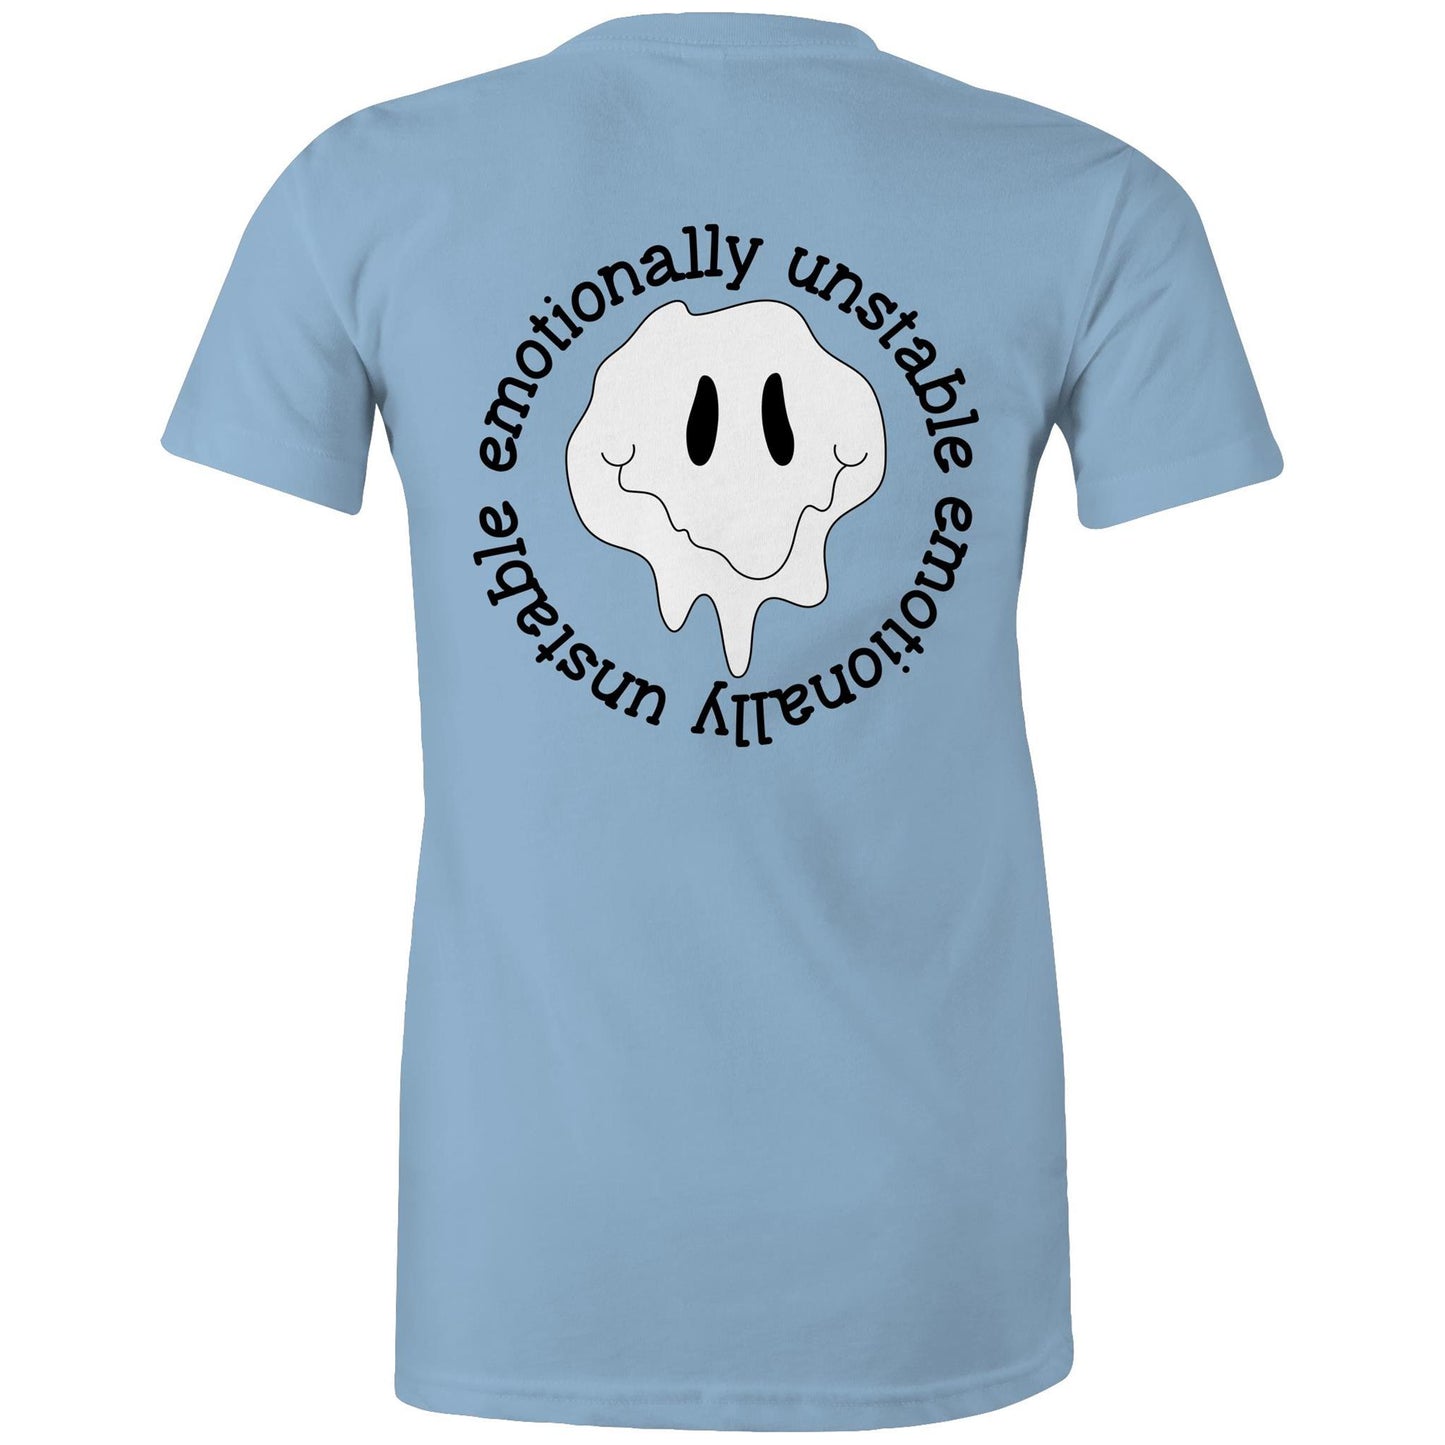 Womens Tee - Emotionally Unstable